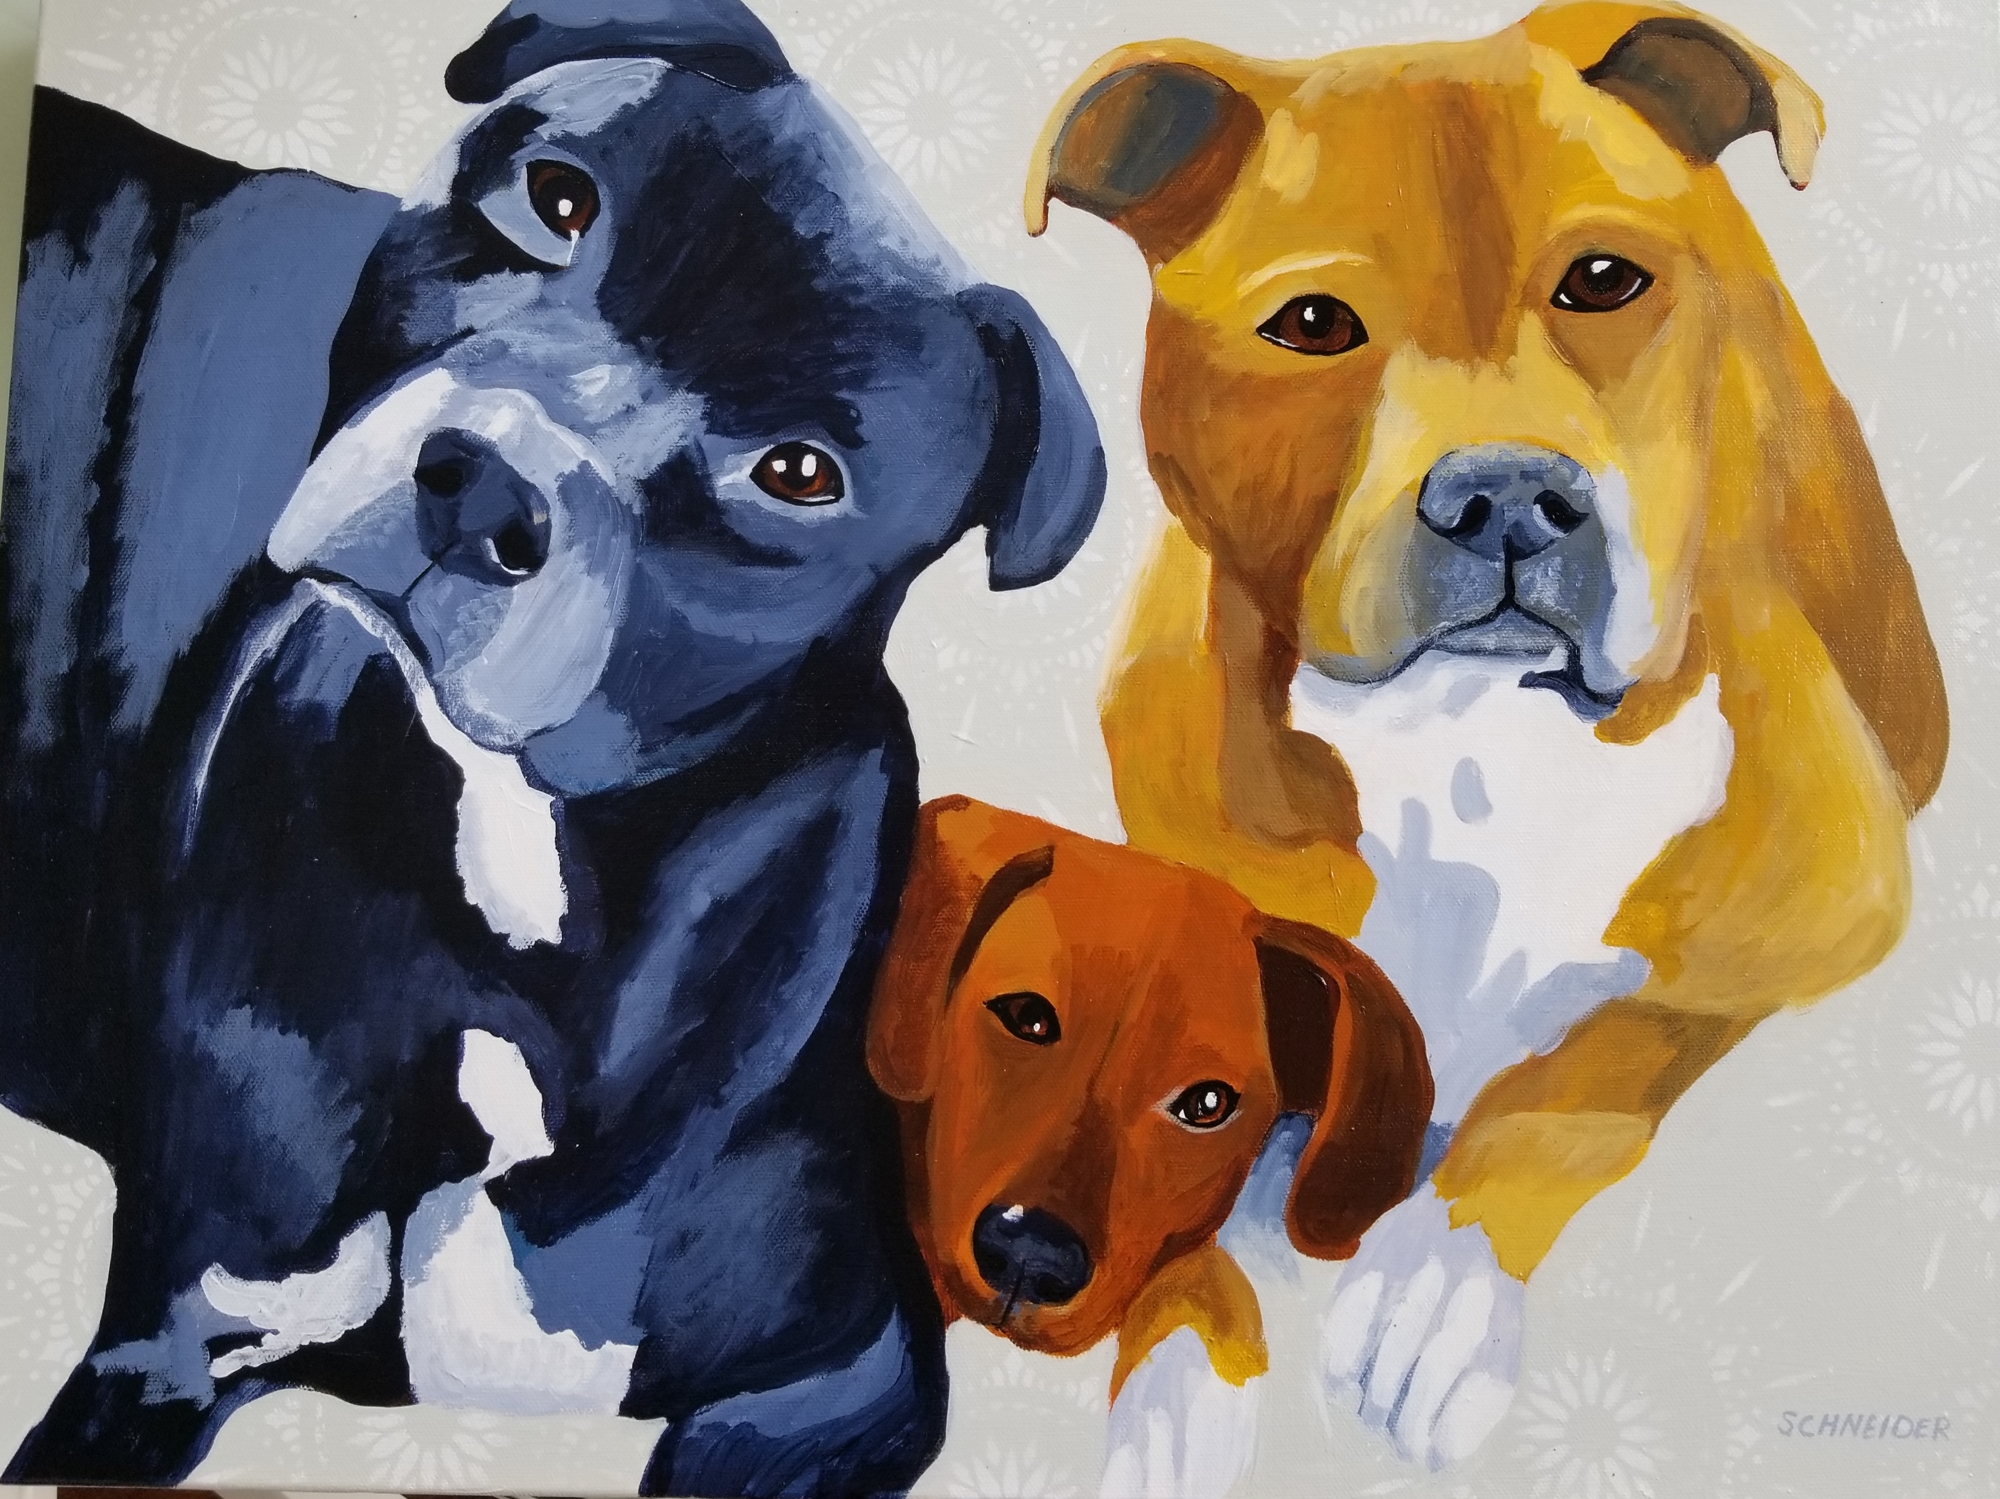 Jody Schneider receives more requests to paint dogs, such as Spunky, Tank and Scrappy, than any other animal. (Courtesy of Jody Schneider)